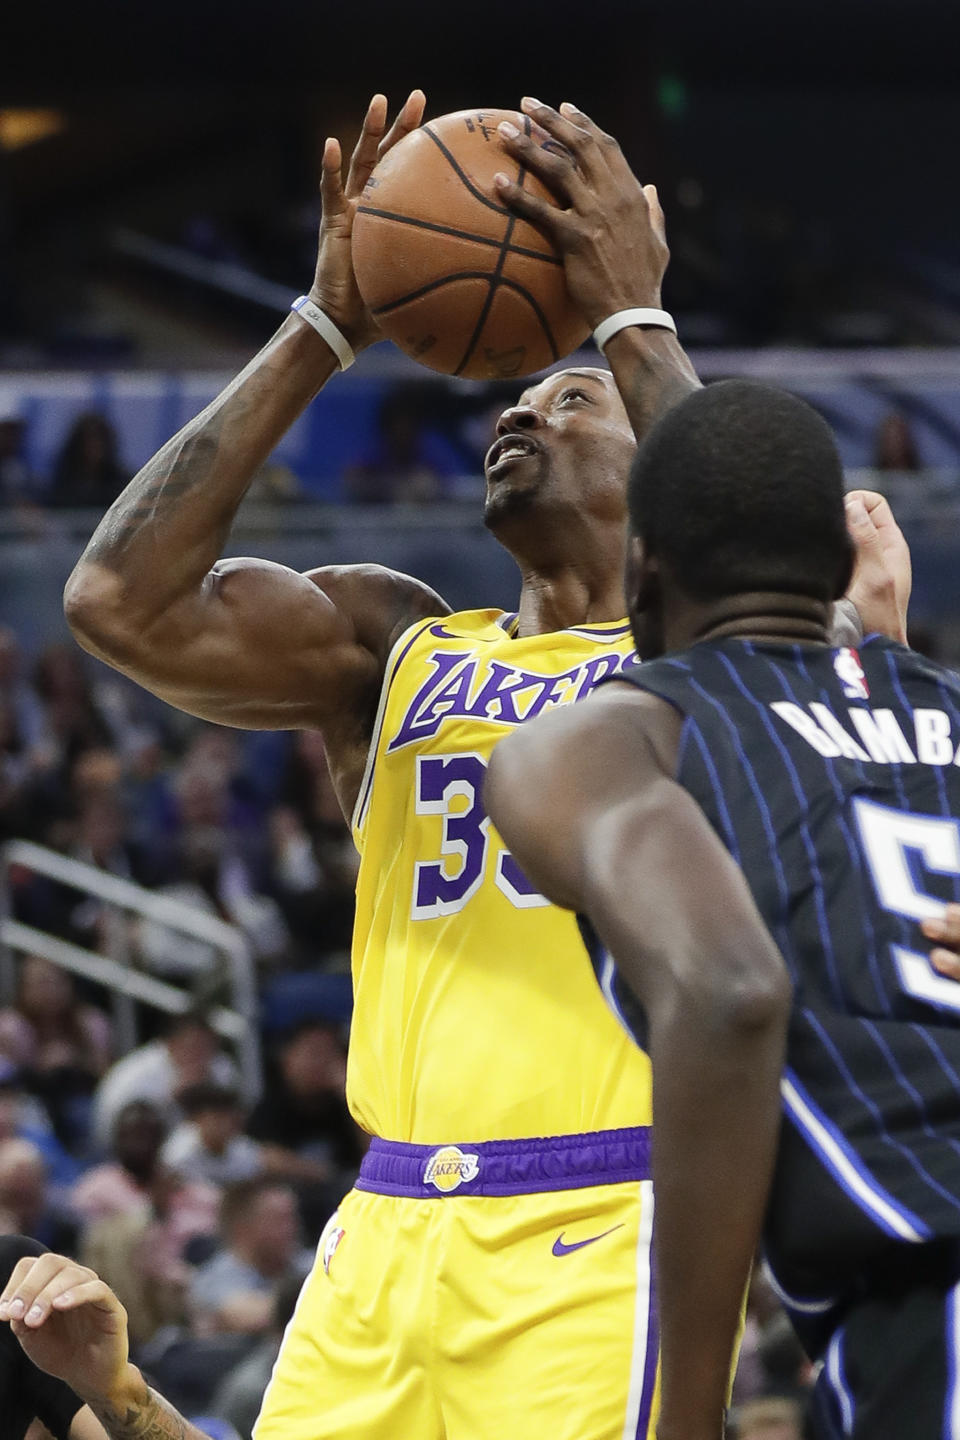 Los Angeles Lakers center Dwight Howard, left, works to get off a shot over Orlando Magic's Mo Bamba, right, during the first half of an NBA basketball game, Wednesday, Dec. 11, 2019, in Orlando, Fla. (AP Photo/John Raoux)